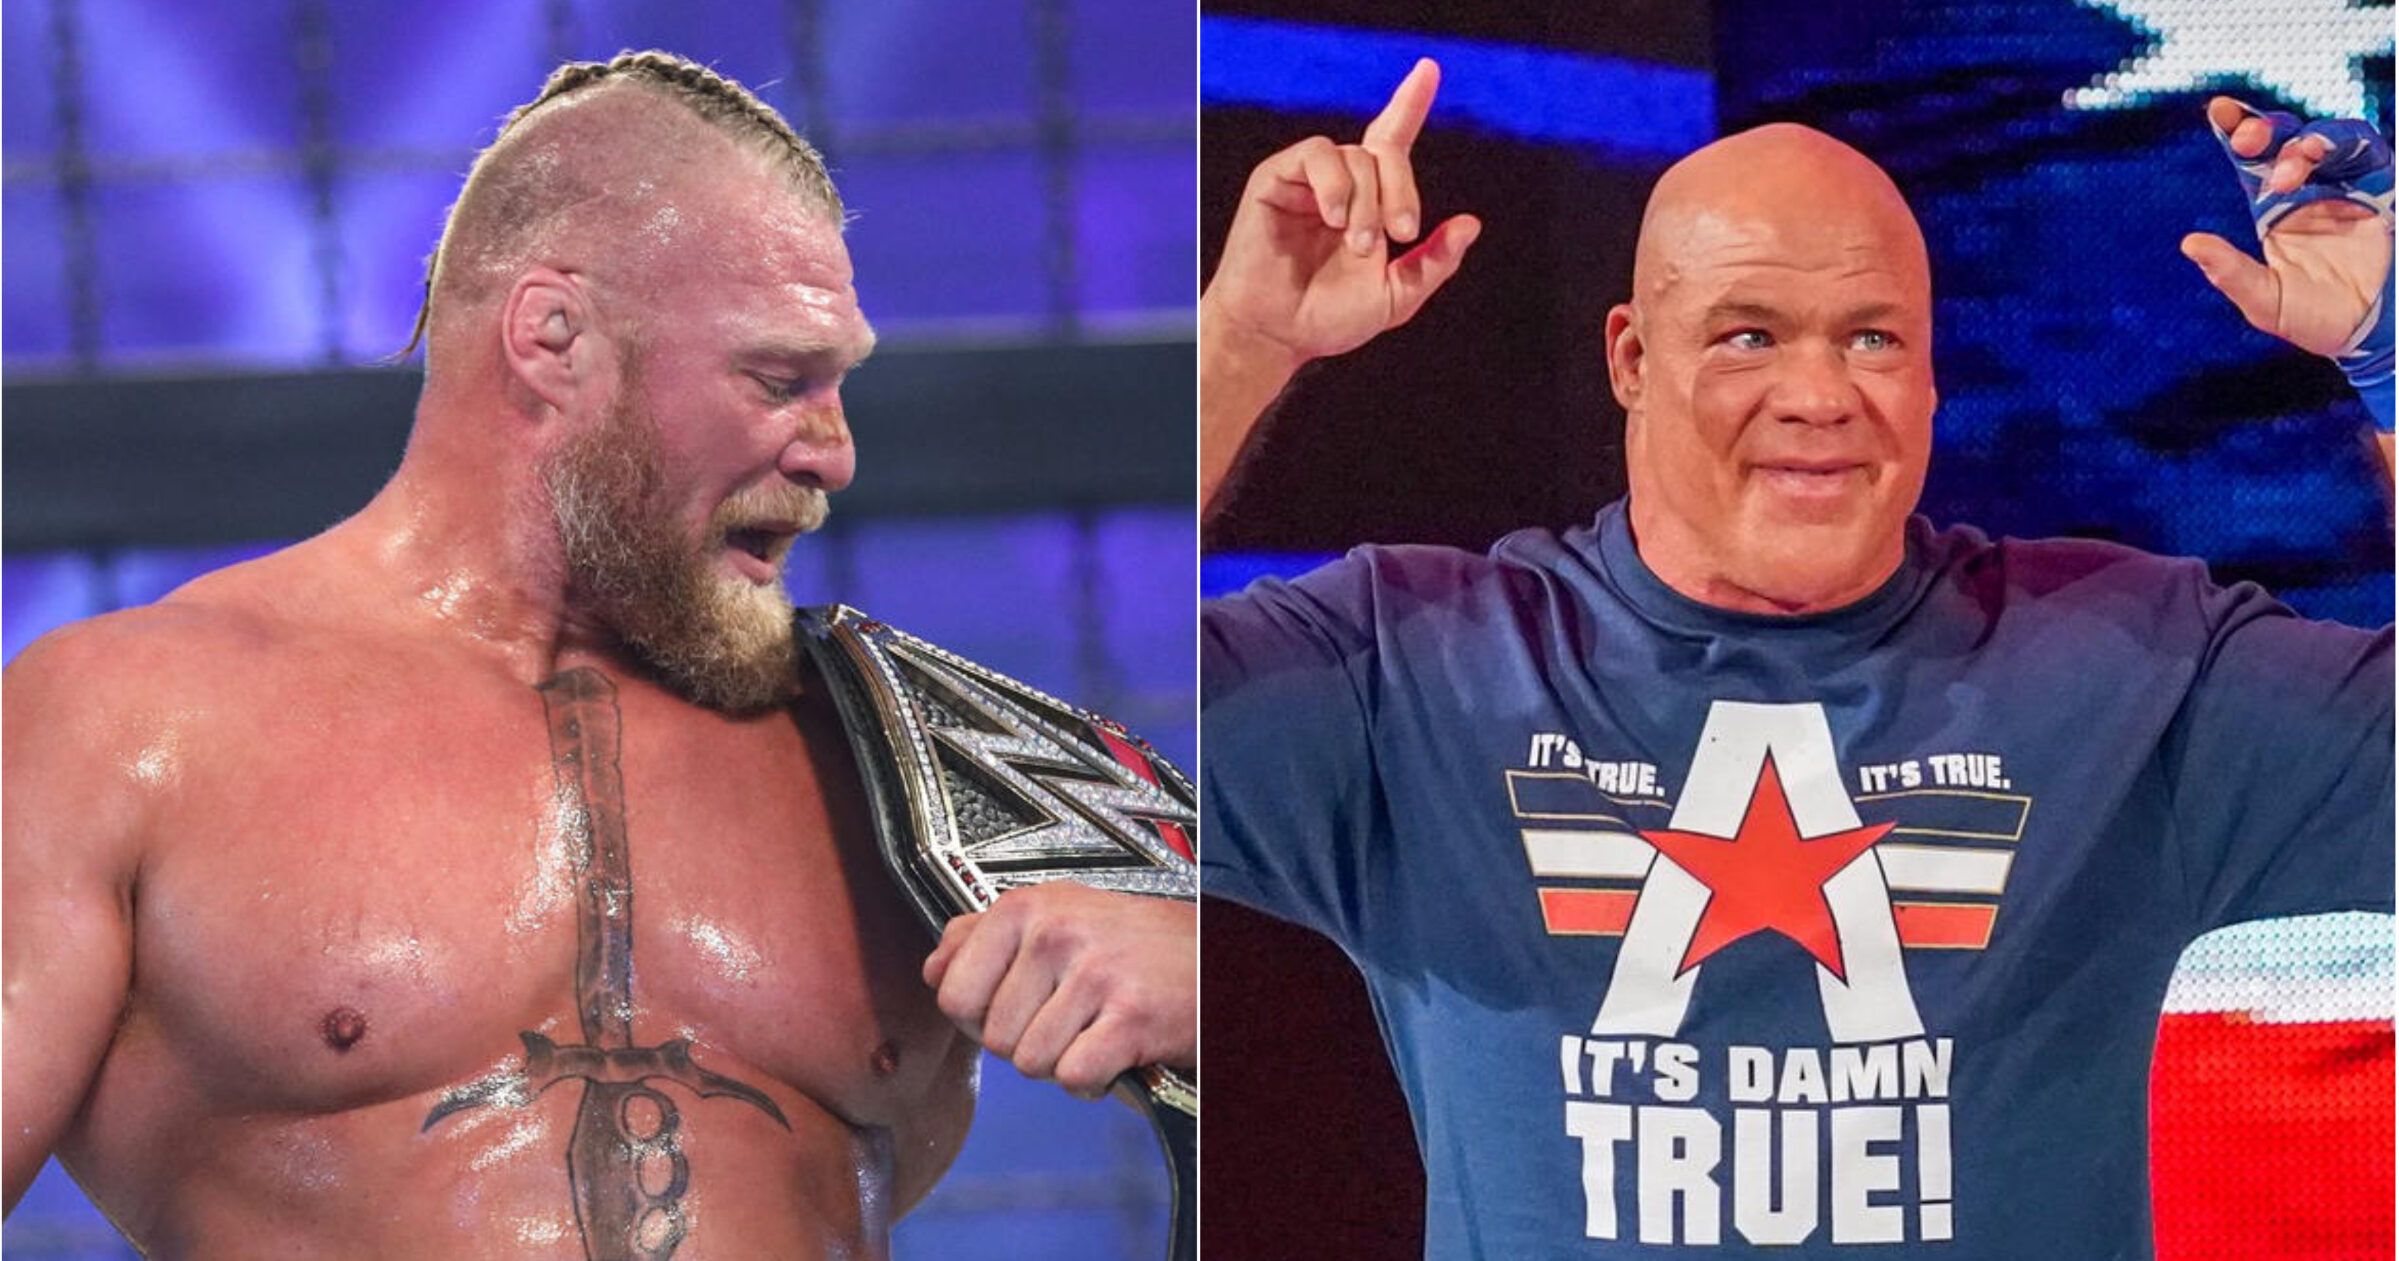 Kurt Angle has denied that he beat up Brock Lesnar in a fight backstage at a WWE show